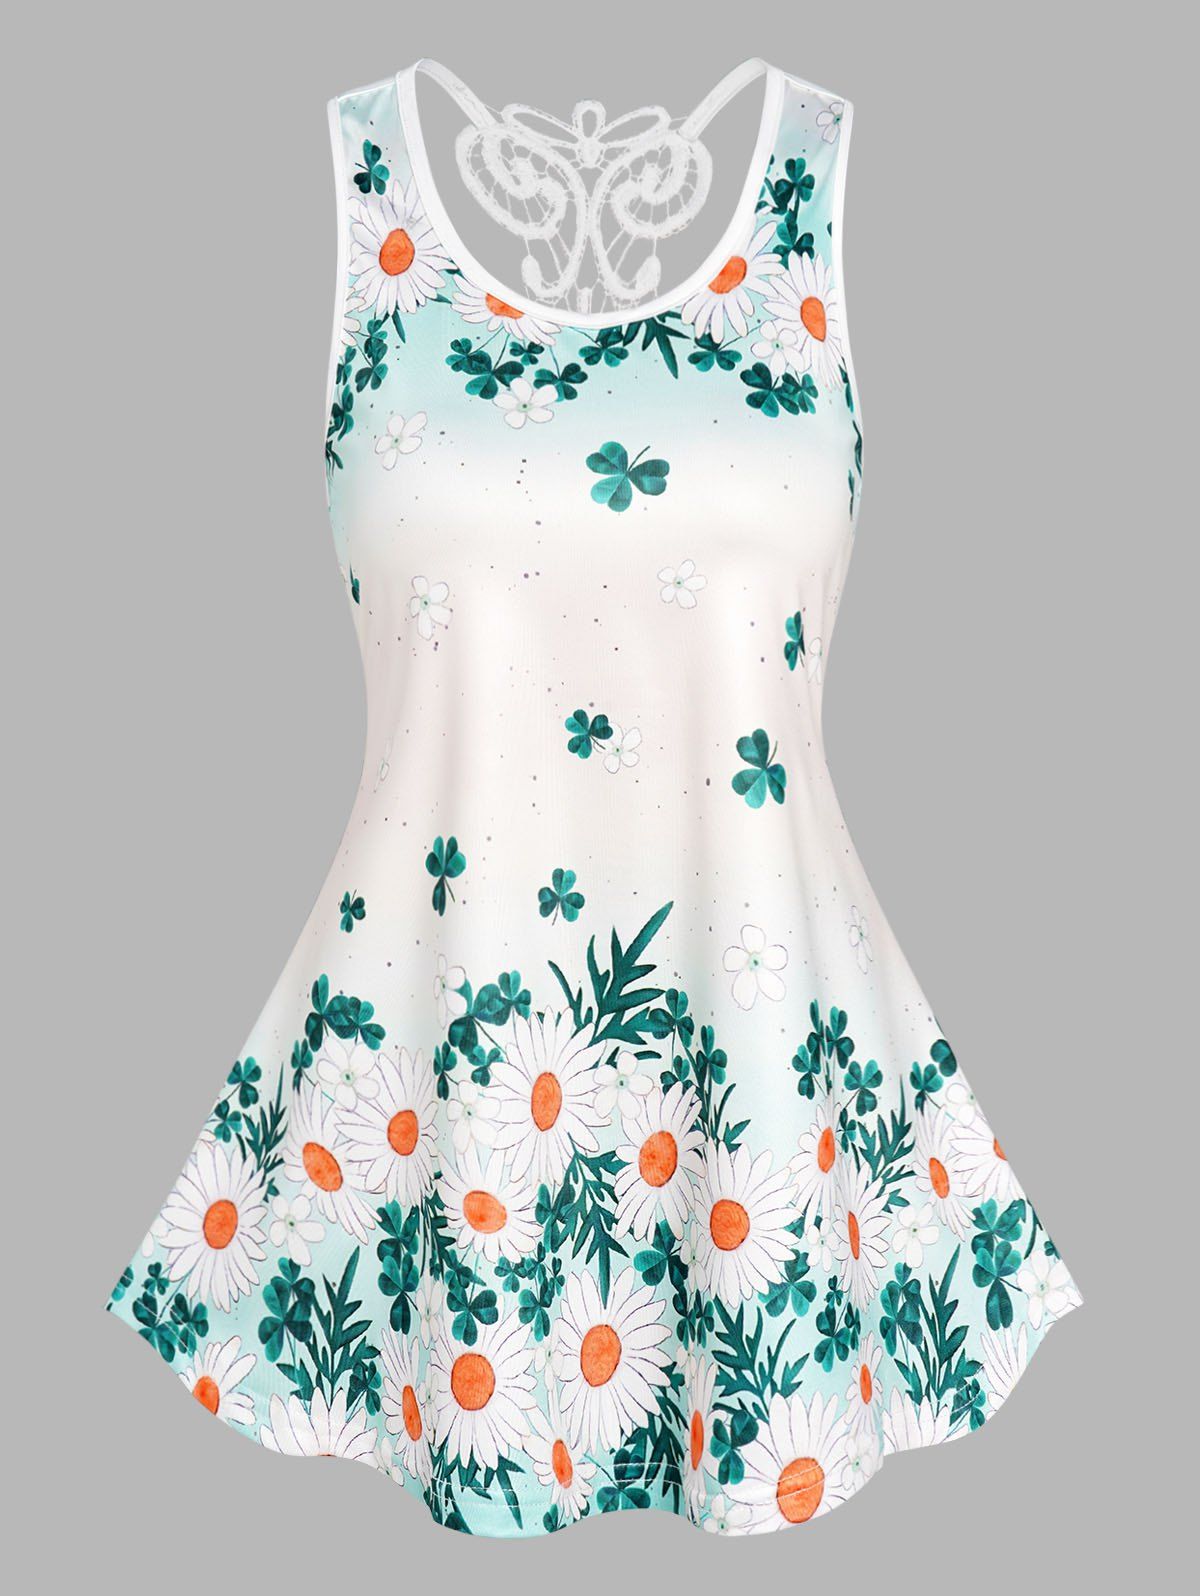 Allover Daisy Print Vacation Tank Top Guipure Lace Insert Casual Tank Top - LIGHT GREEN XXL